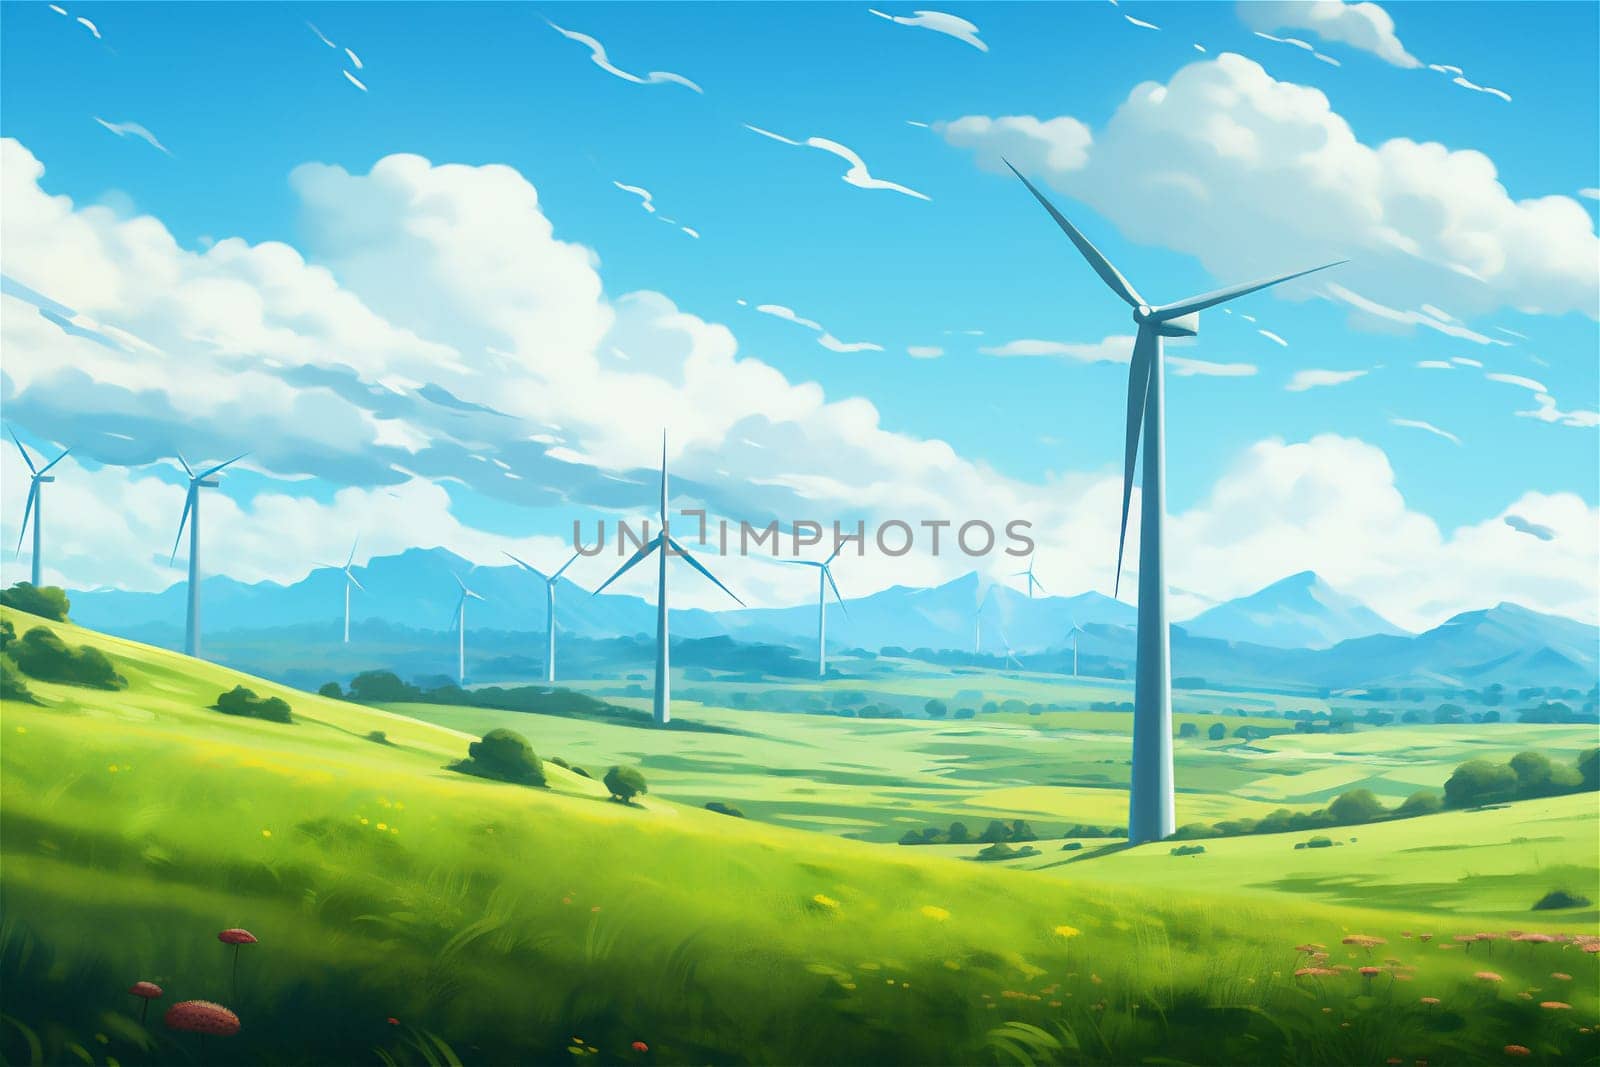 Wind farm or wind park in a field with green grass, with high wind turbines for generation electricity with copy space. Green energy concept.